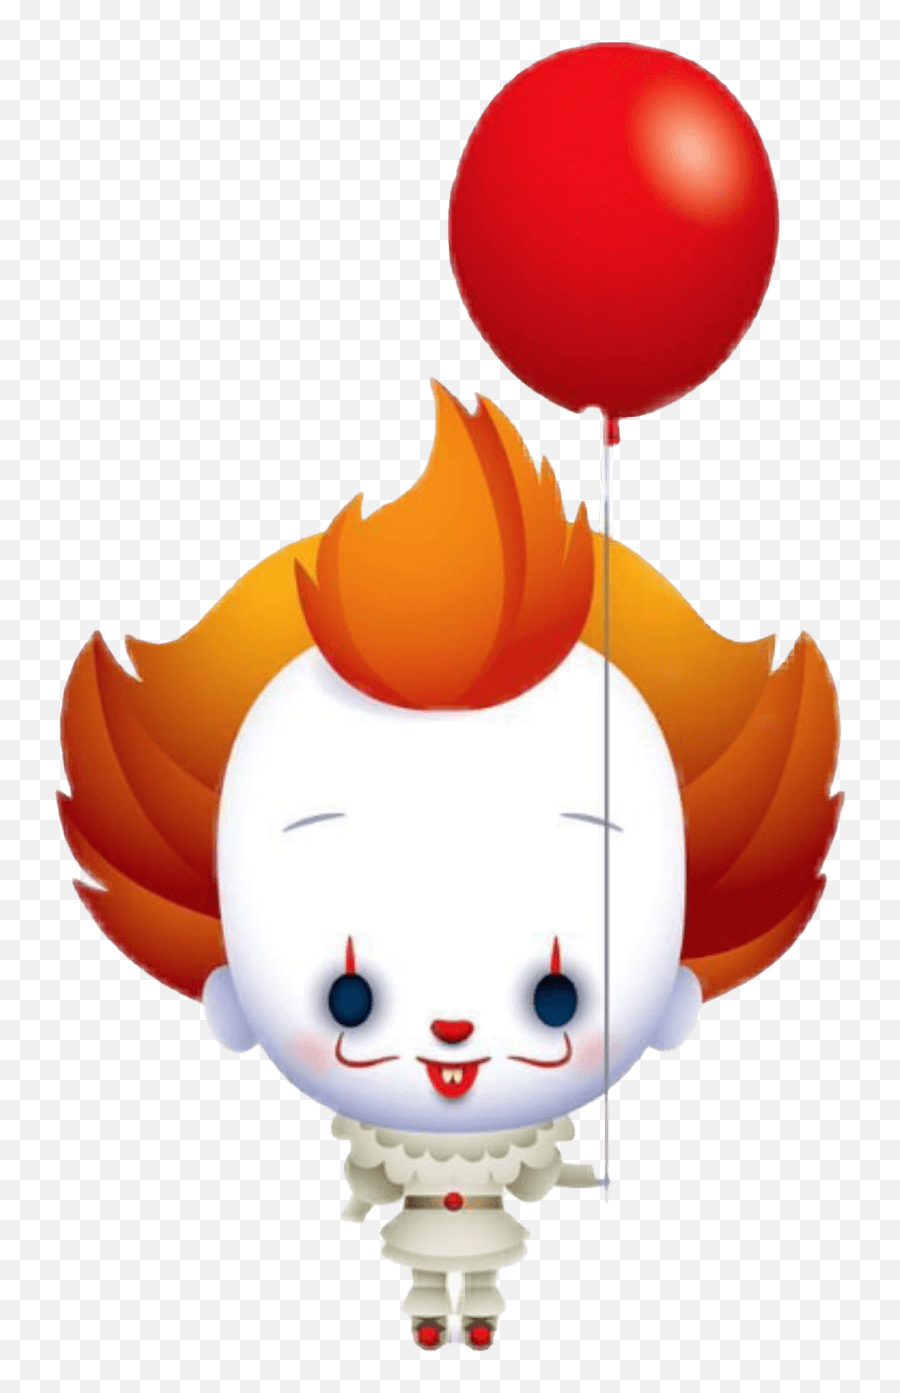 Pennywise Balloon Png Transparent Image - Halloween Cute Clown Cartoon Emoji,Pennywise Clipart